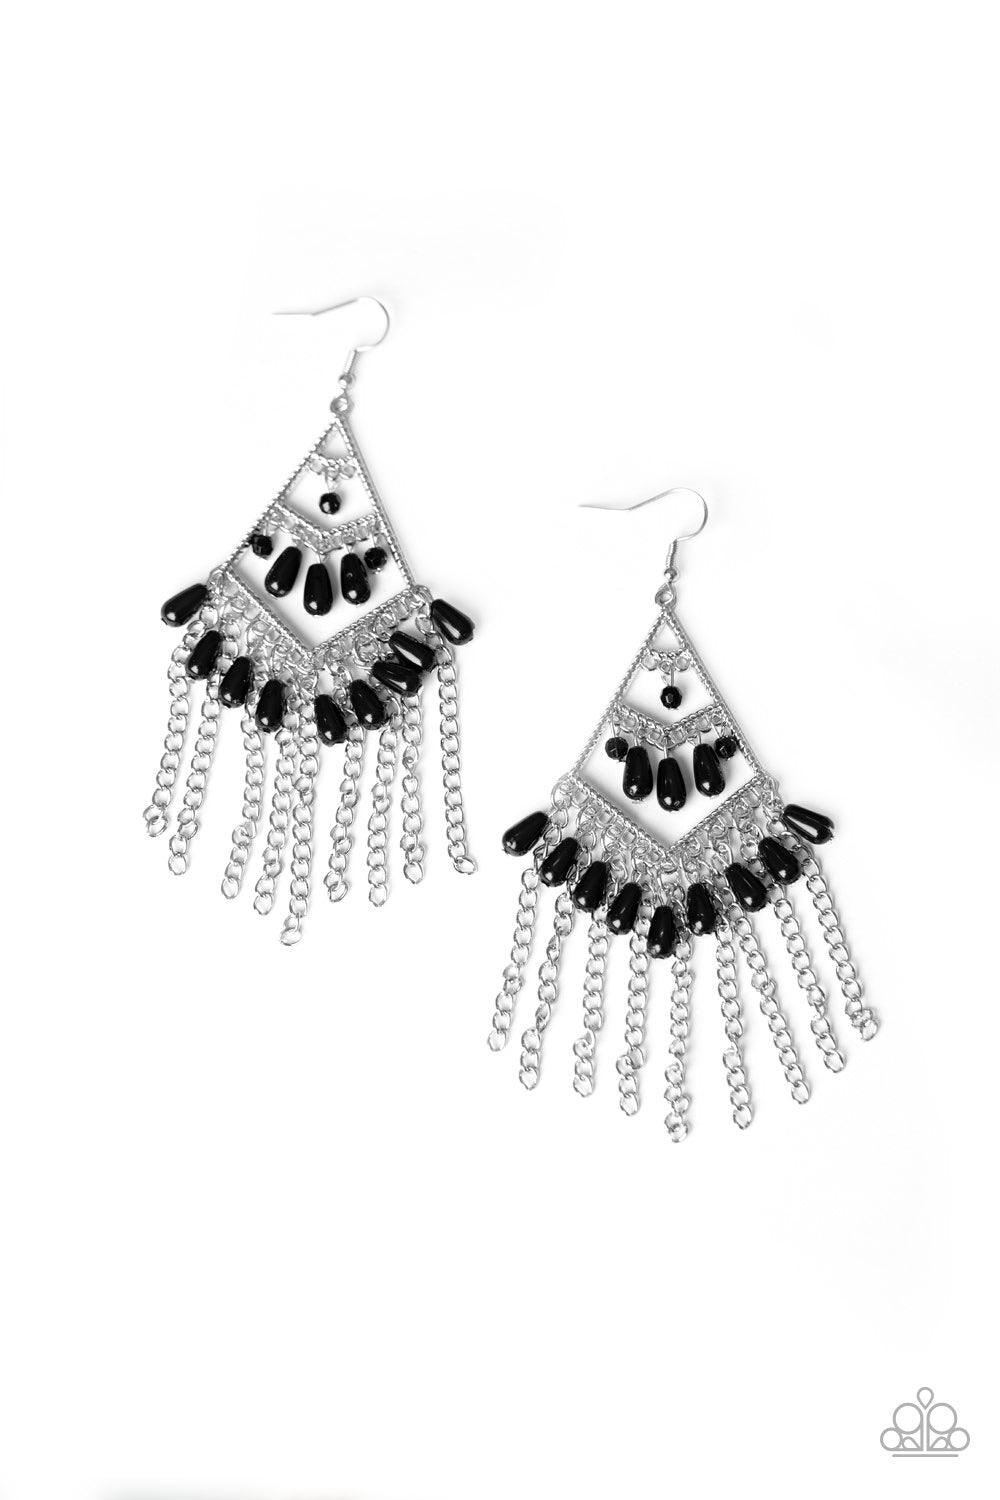 Paparazzi Accessories Trending Transcendence - Black Dainty black teardrop beads cascade from three tiers of a silver kite-shaped frame. Shimmery silver chains stream from the bottom of the frame, adding movement to the colorful fringe. Earring attaches t